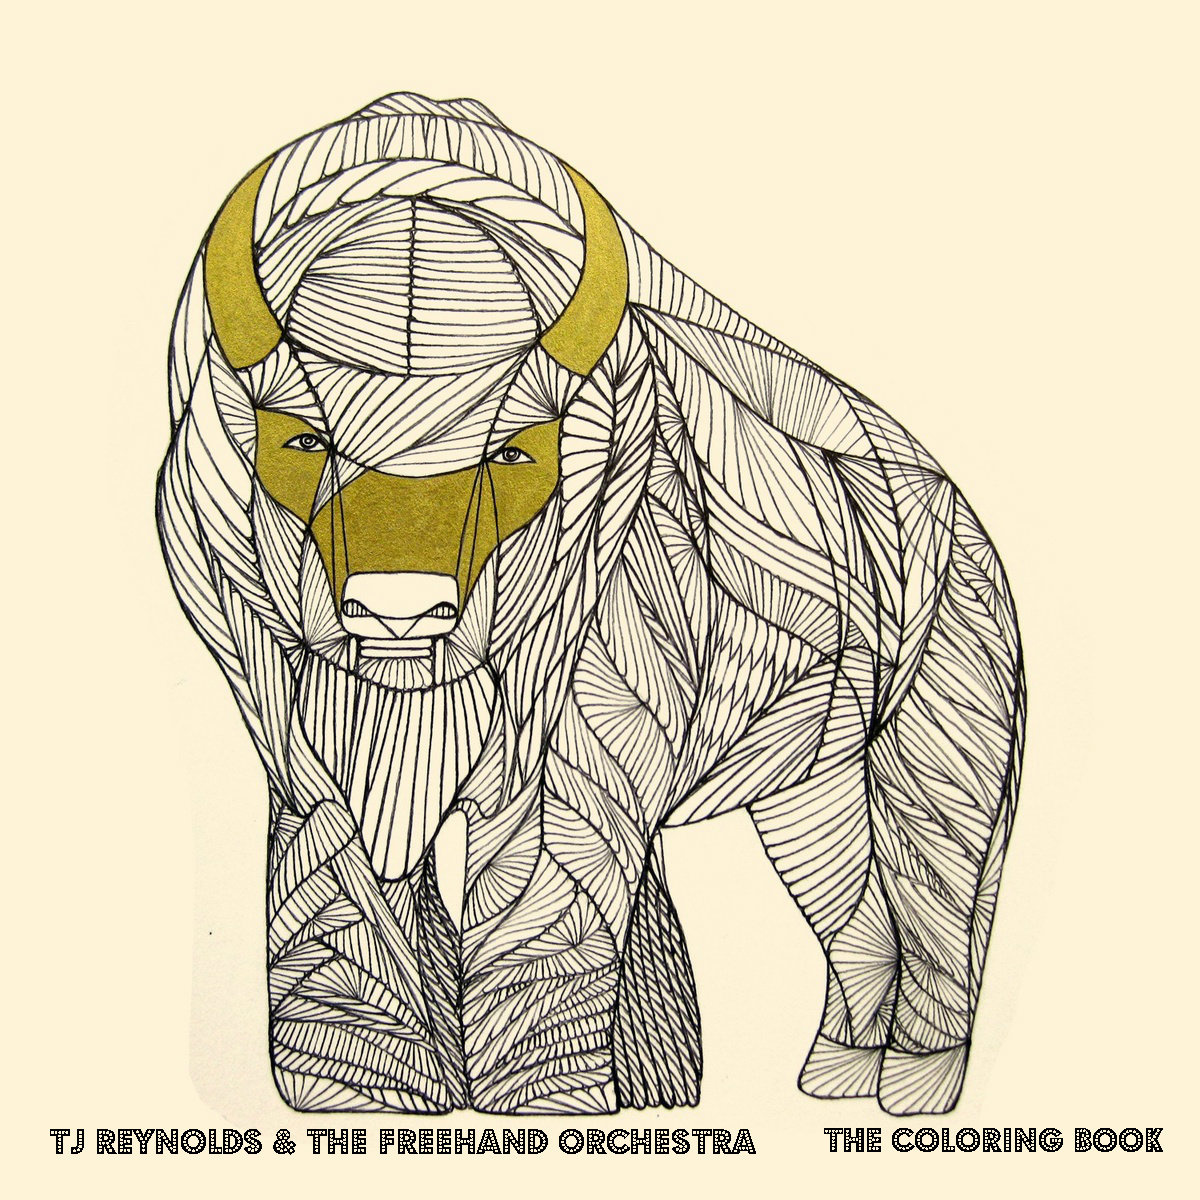 TJ Reynolds & the Freehand Orchestra "The Coloring Book" Release | @Zenolds 